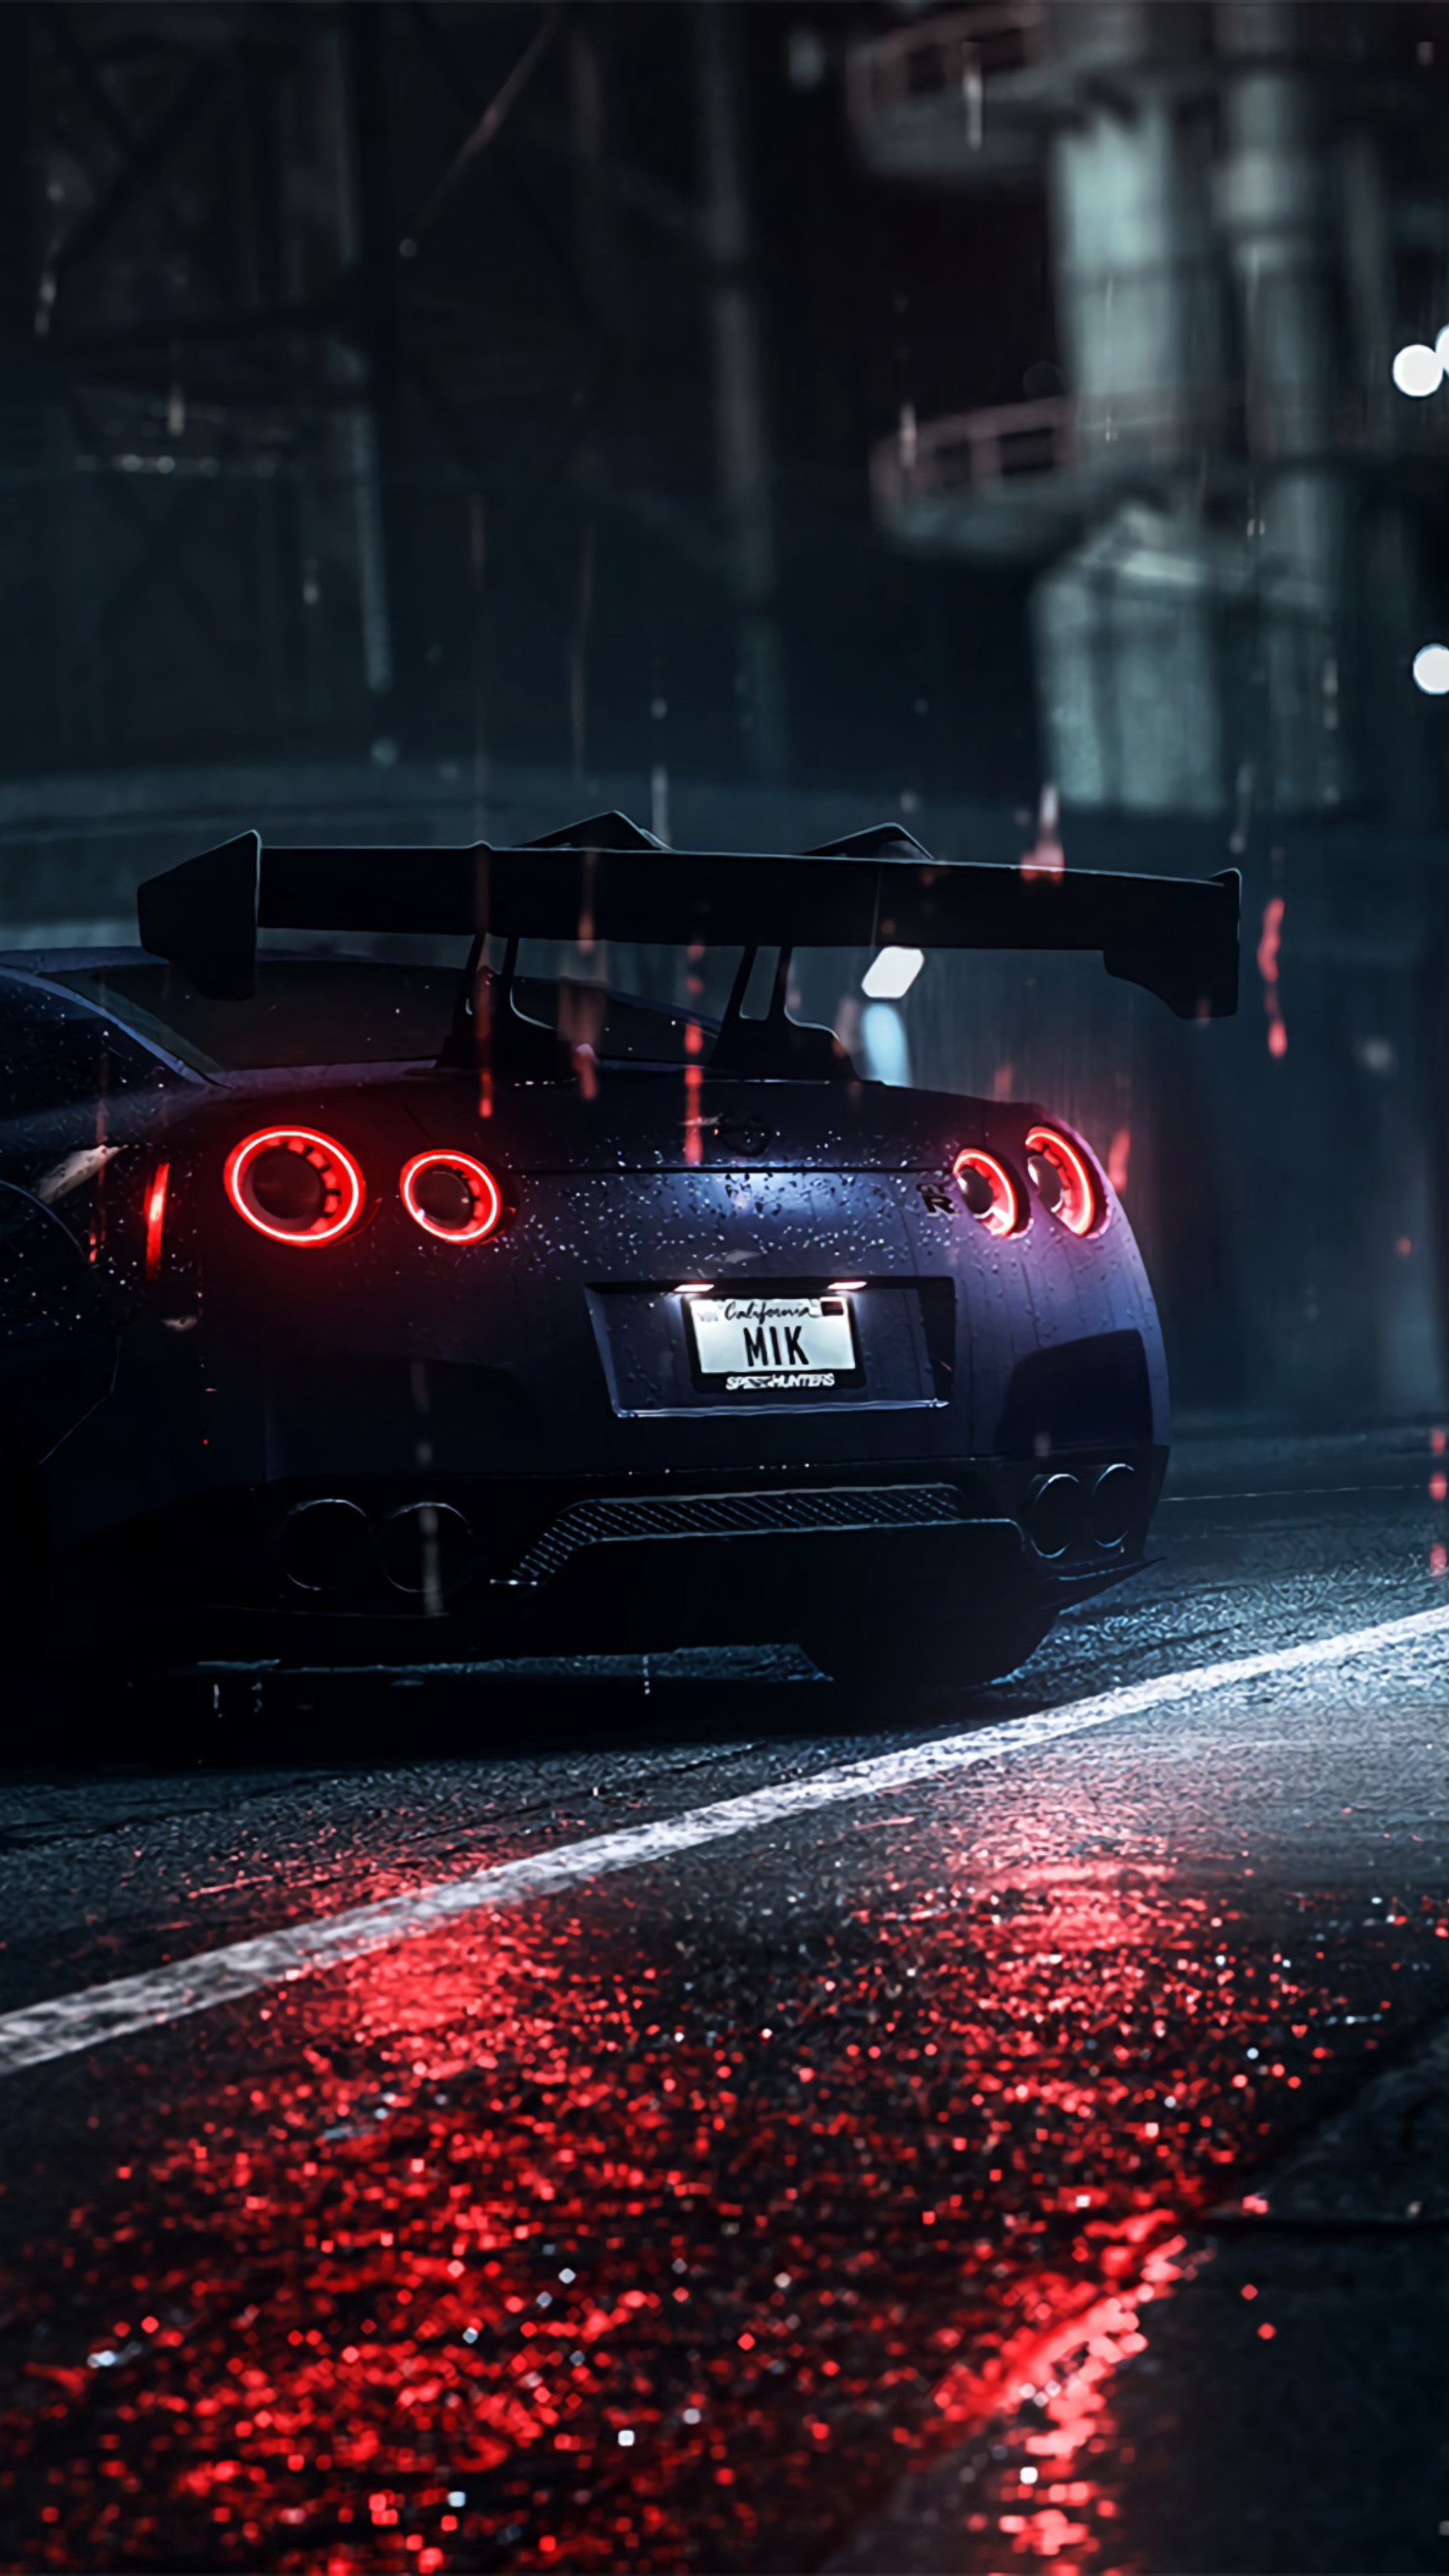 Nissan GT-R, Art-inspired wallpaper, Exquisite Sony Xperia background, Sports car masterpiece, 2160x3840 4K Handy